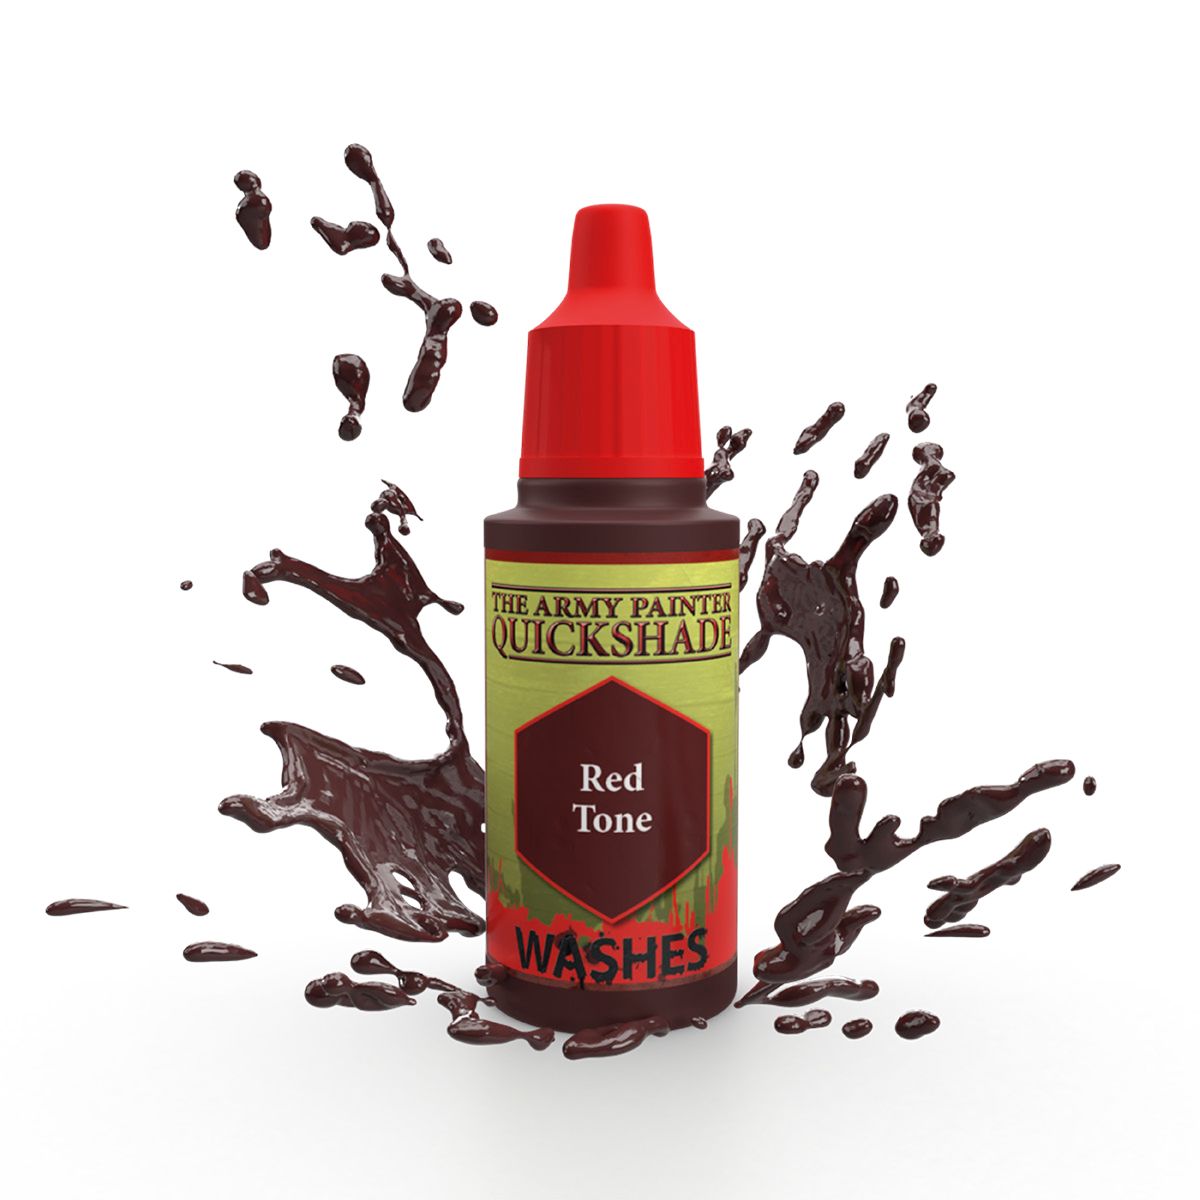 The Army Painter Washes: Red Tone18ml | CCGPrime